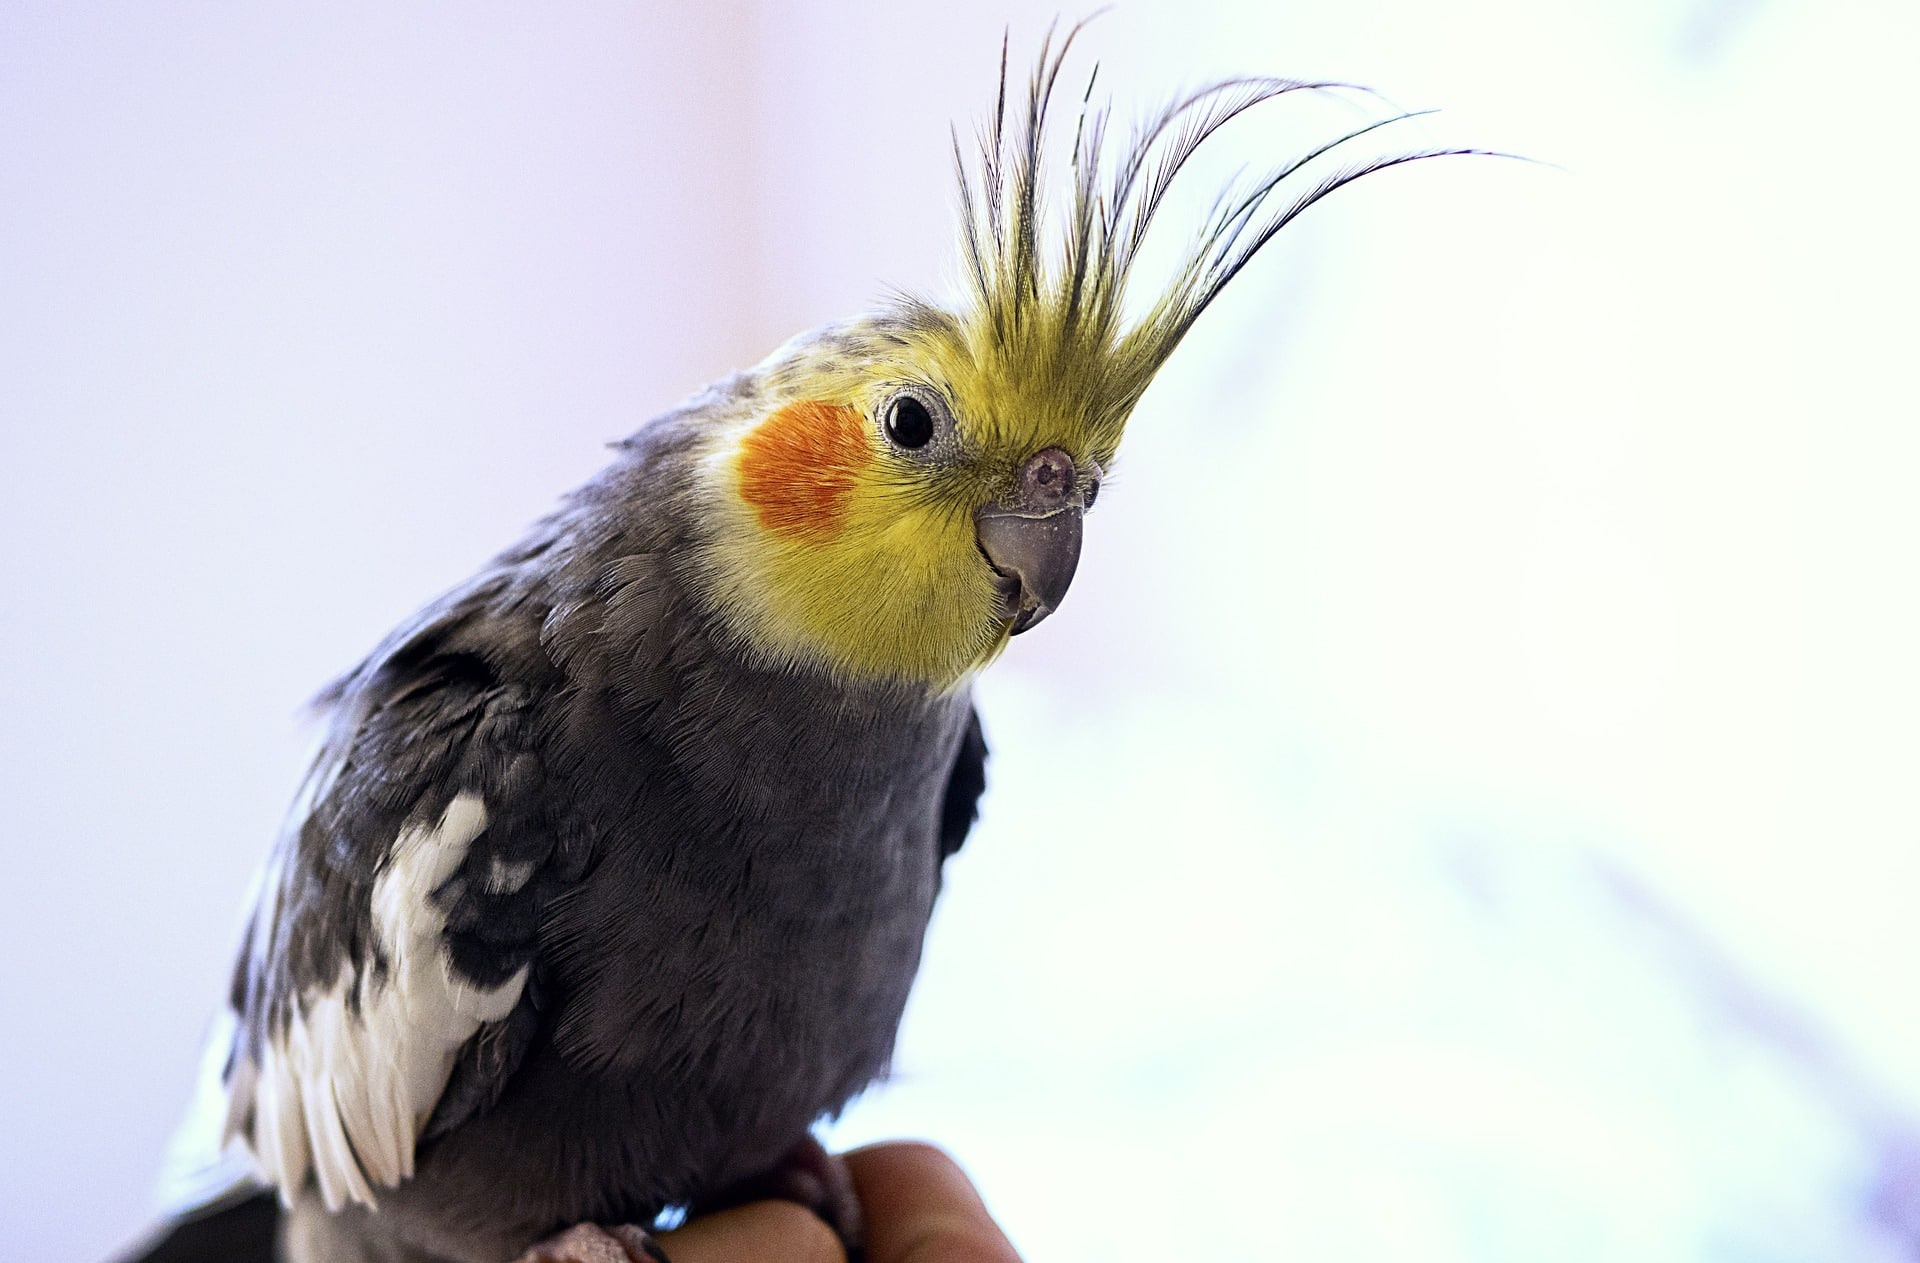 Cockatiel molting tips, Seasonal feather changes, Parrot molting advice, Feather care, 1920x1270 HD Desktop